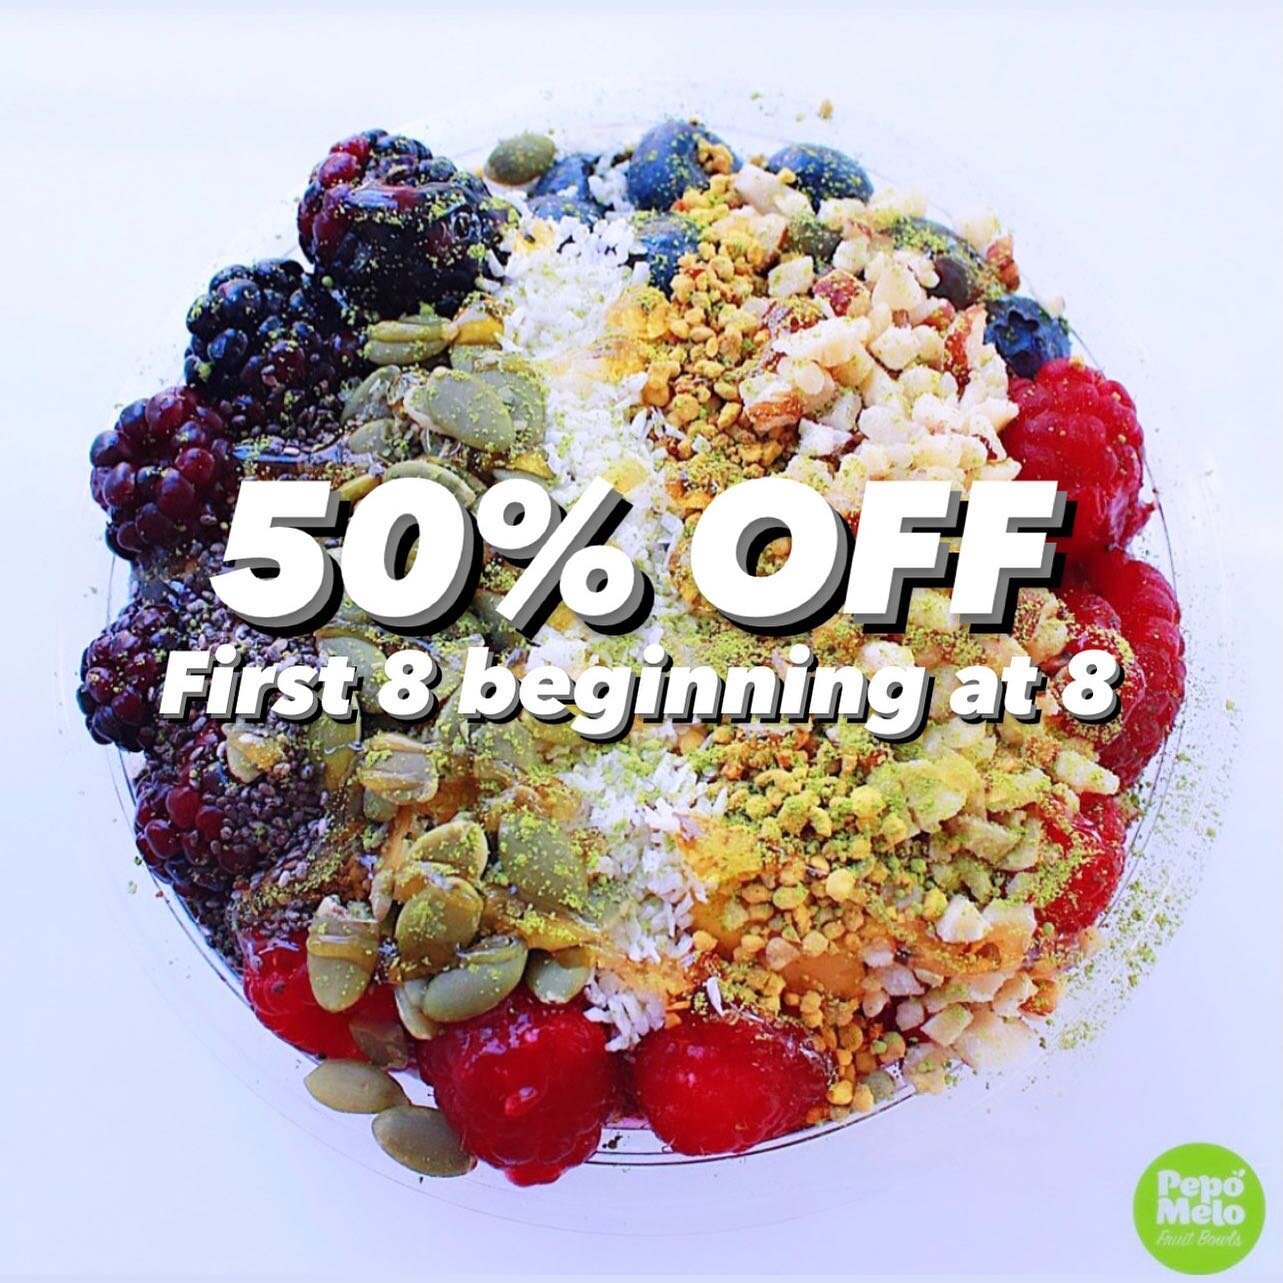 We are now opening at 8am!  First 8 bowls purchased during the 8 o&rsquo;clock hour gets 50% off their bowl!! This is a weekday promo available daily (M-F) at our Claremont location exclusively. 

See ya soon!